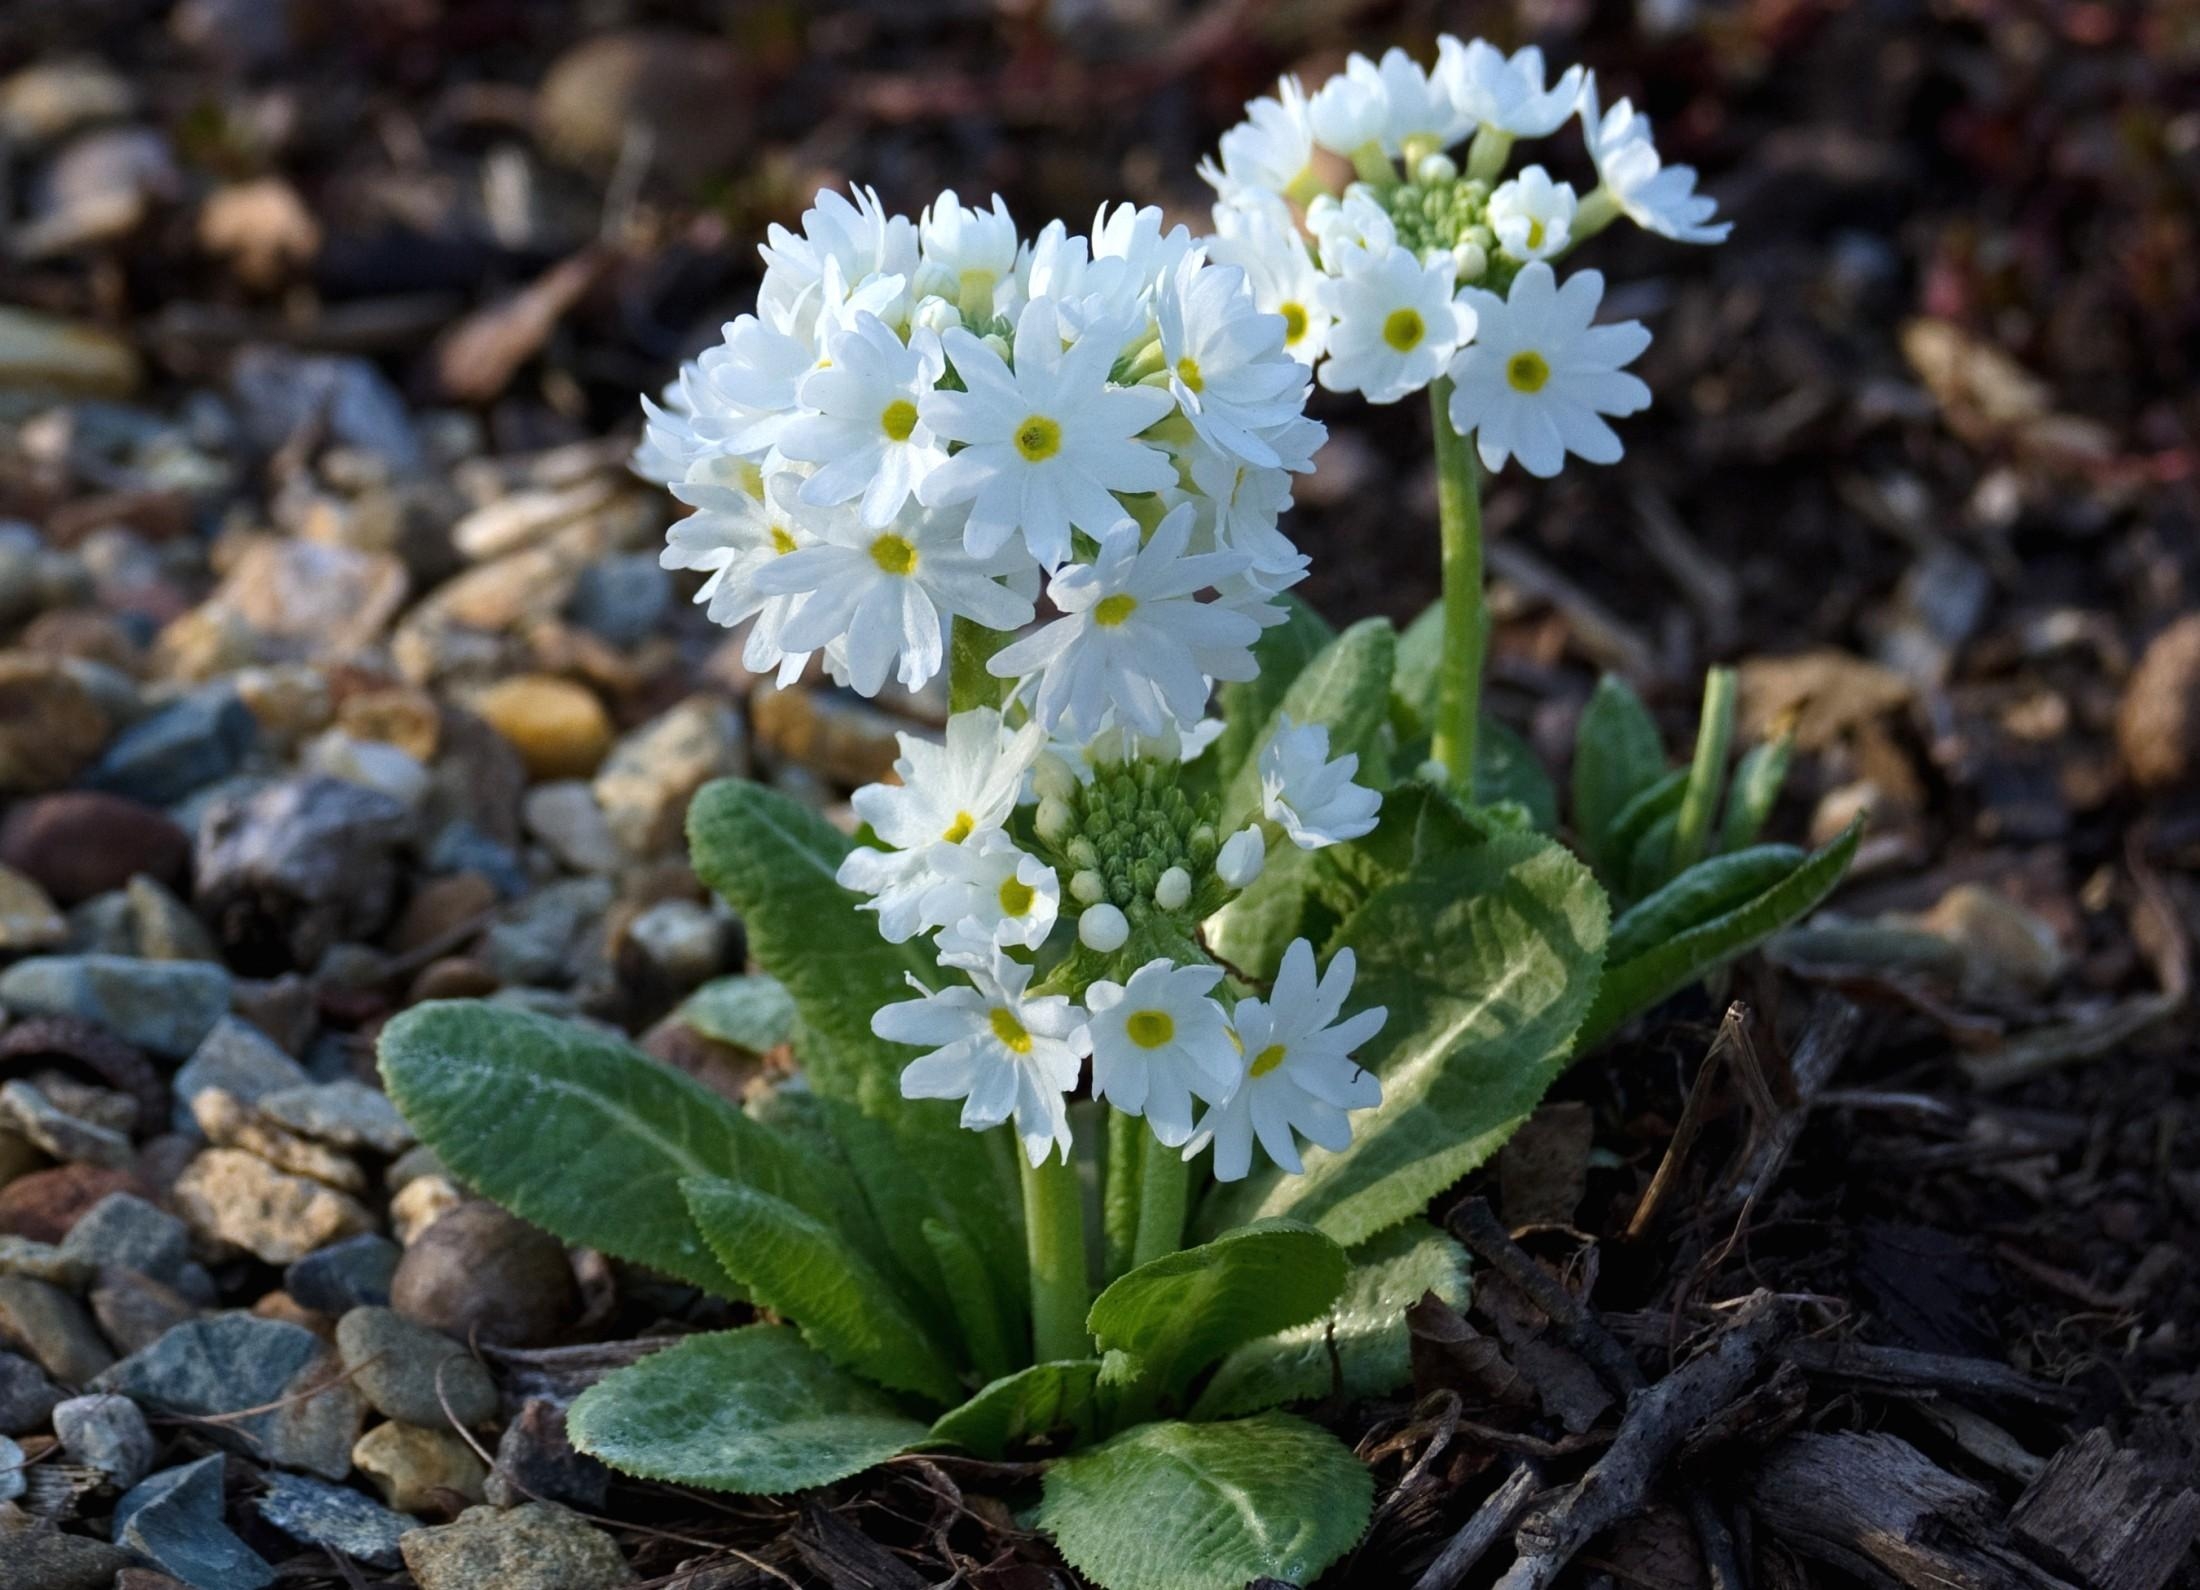 android flower, close up, flowers, snow white, primrose, ground, priming